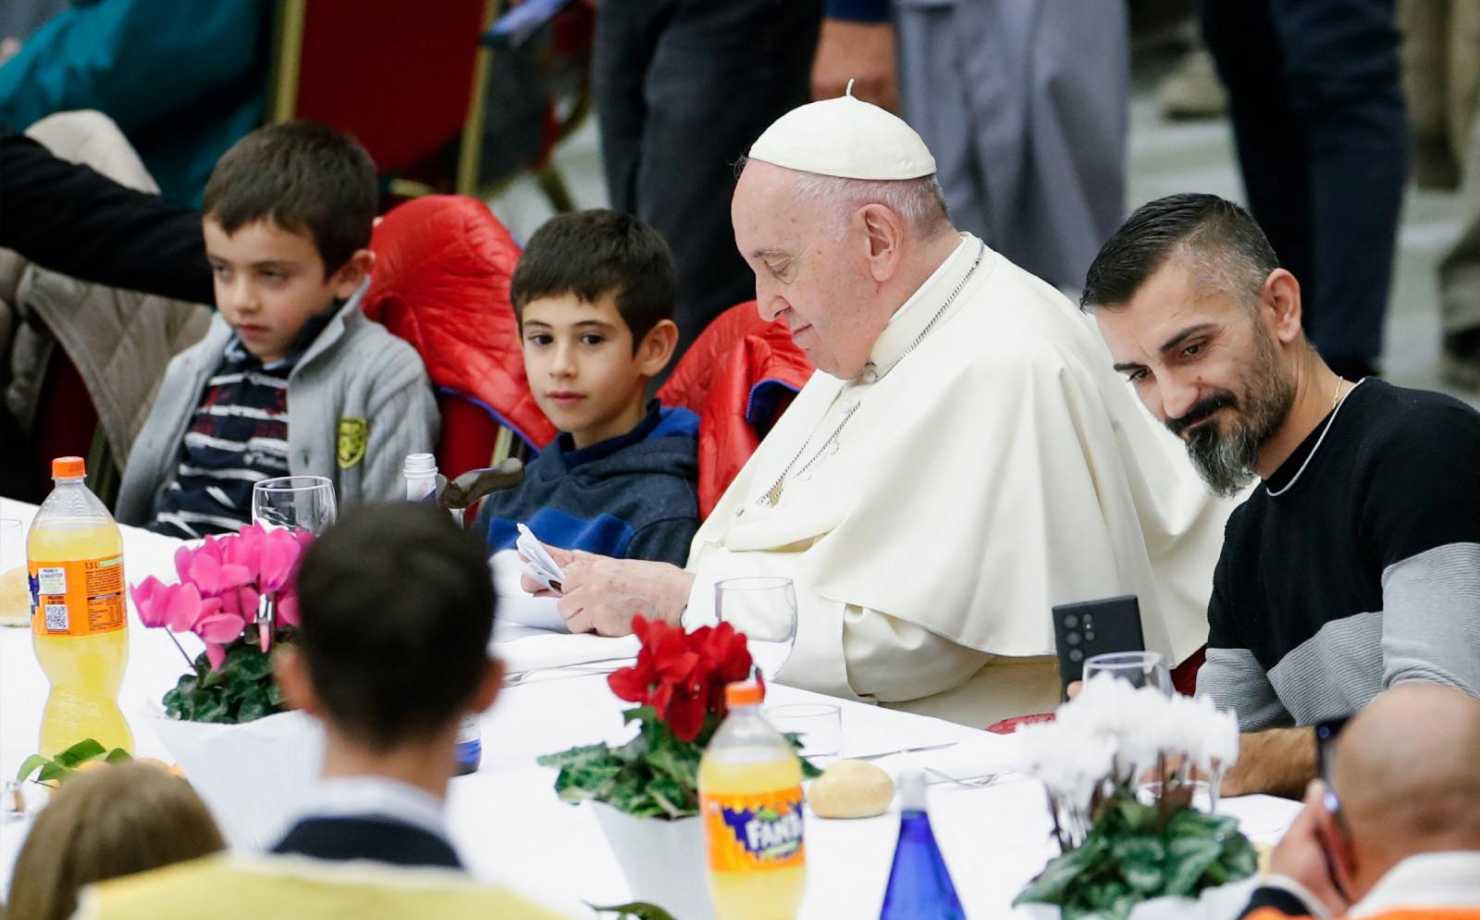 Pope at lunch with the poor